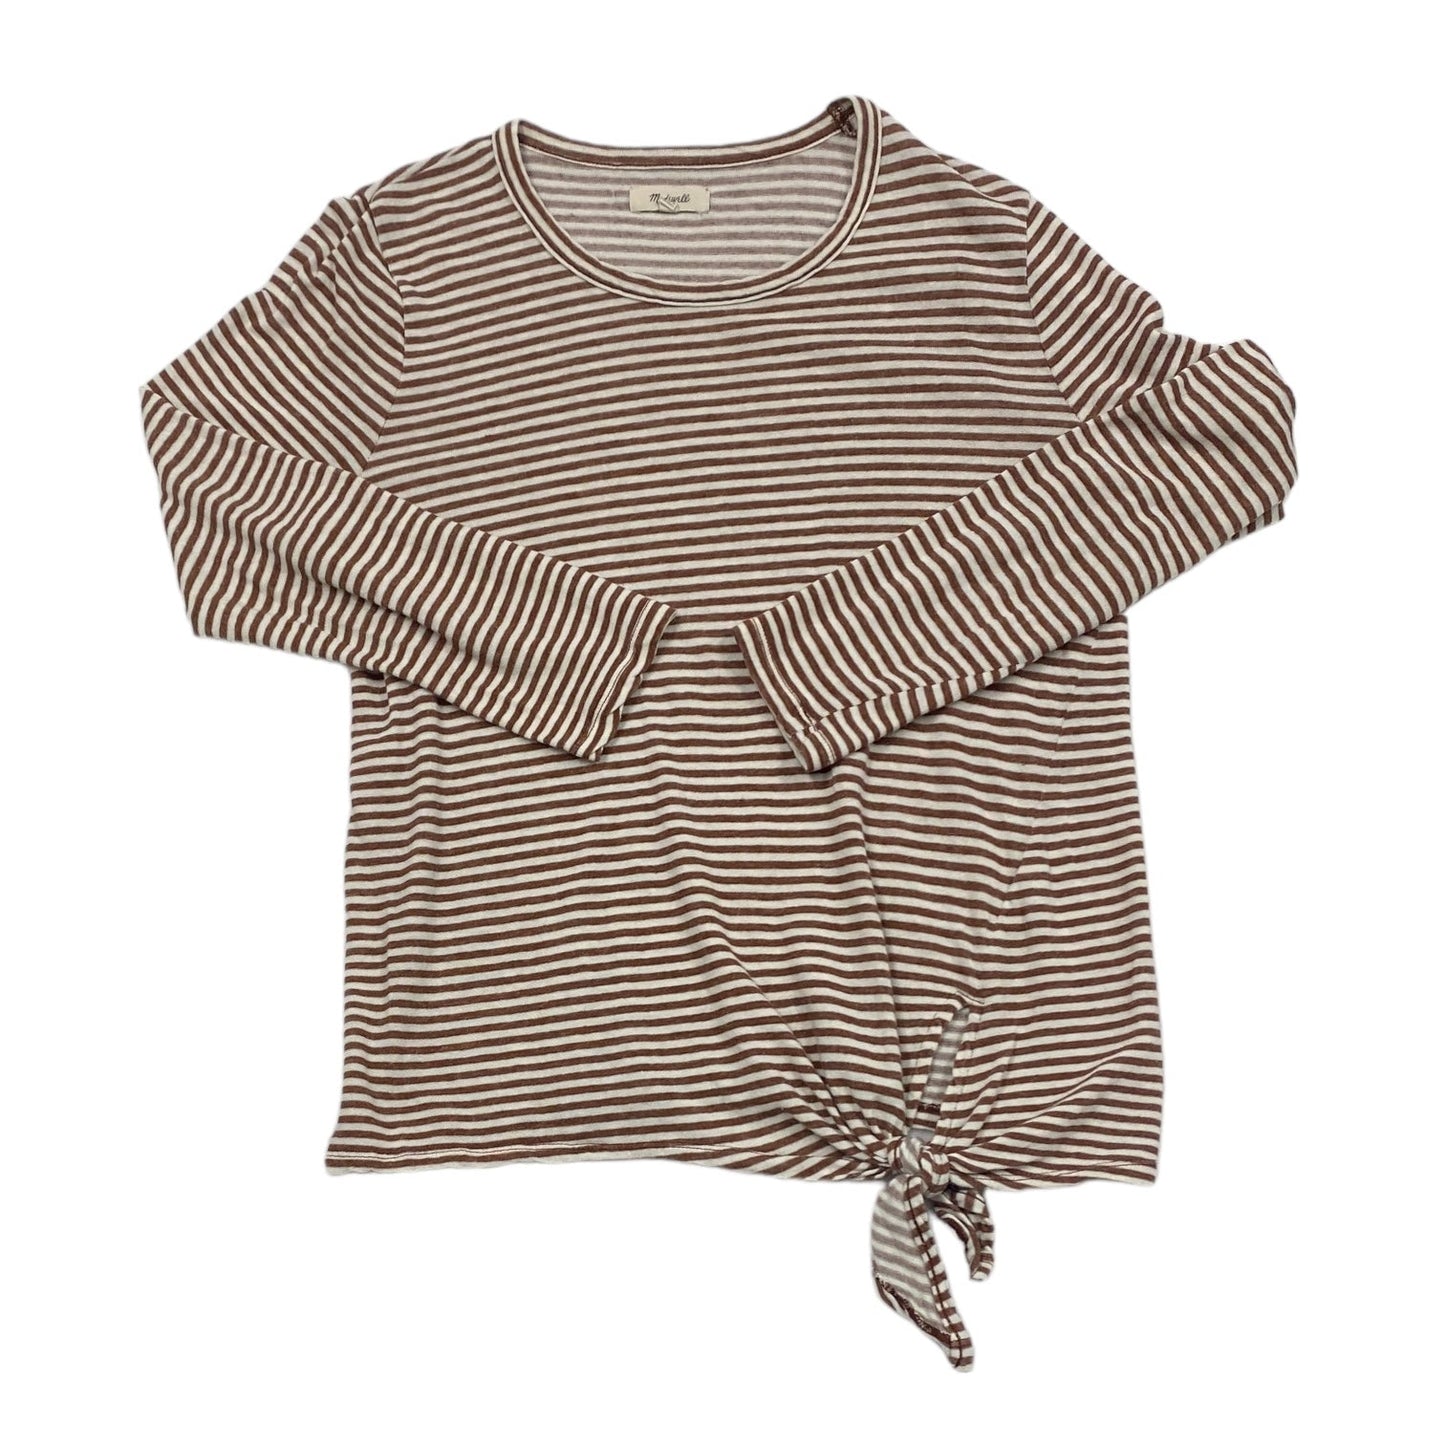 Striped Top Long Sleeve Madewell, Size Xl